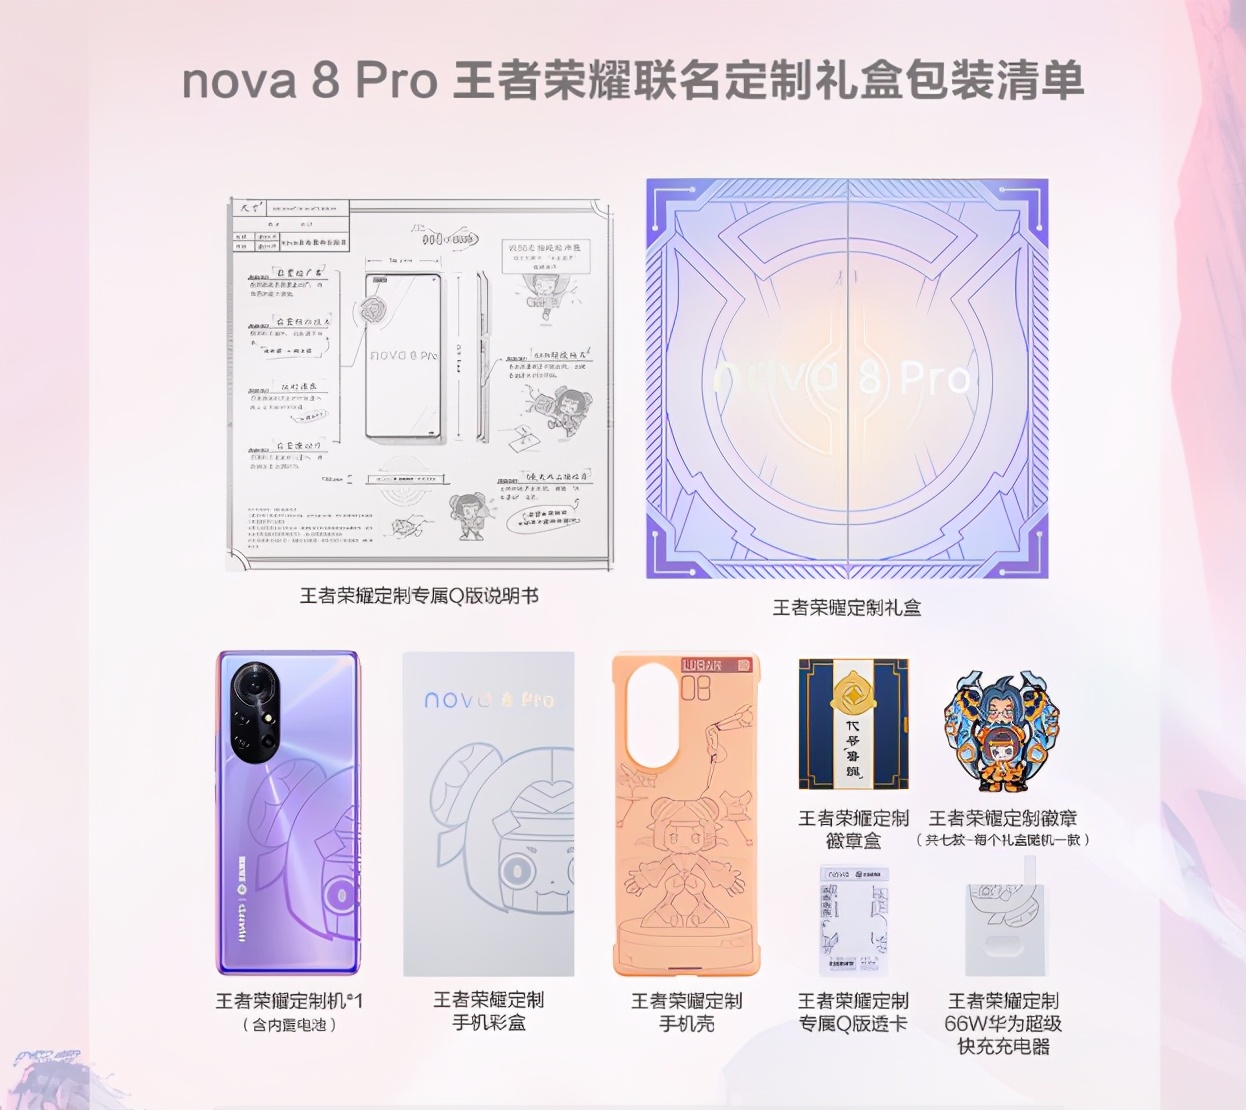 China for Nova8 Pro brand-new demarcate edition is released, price 3999 yuan